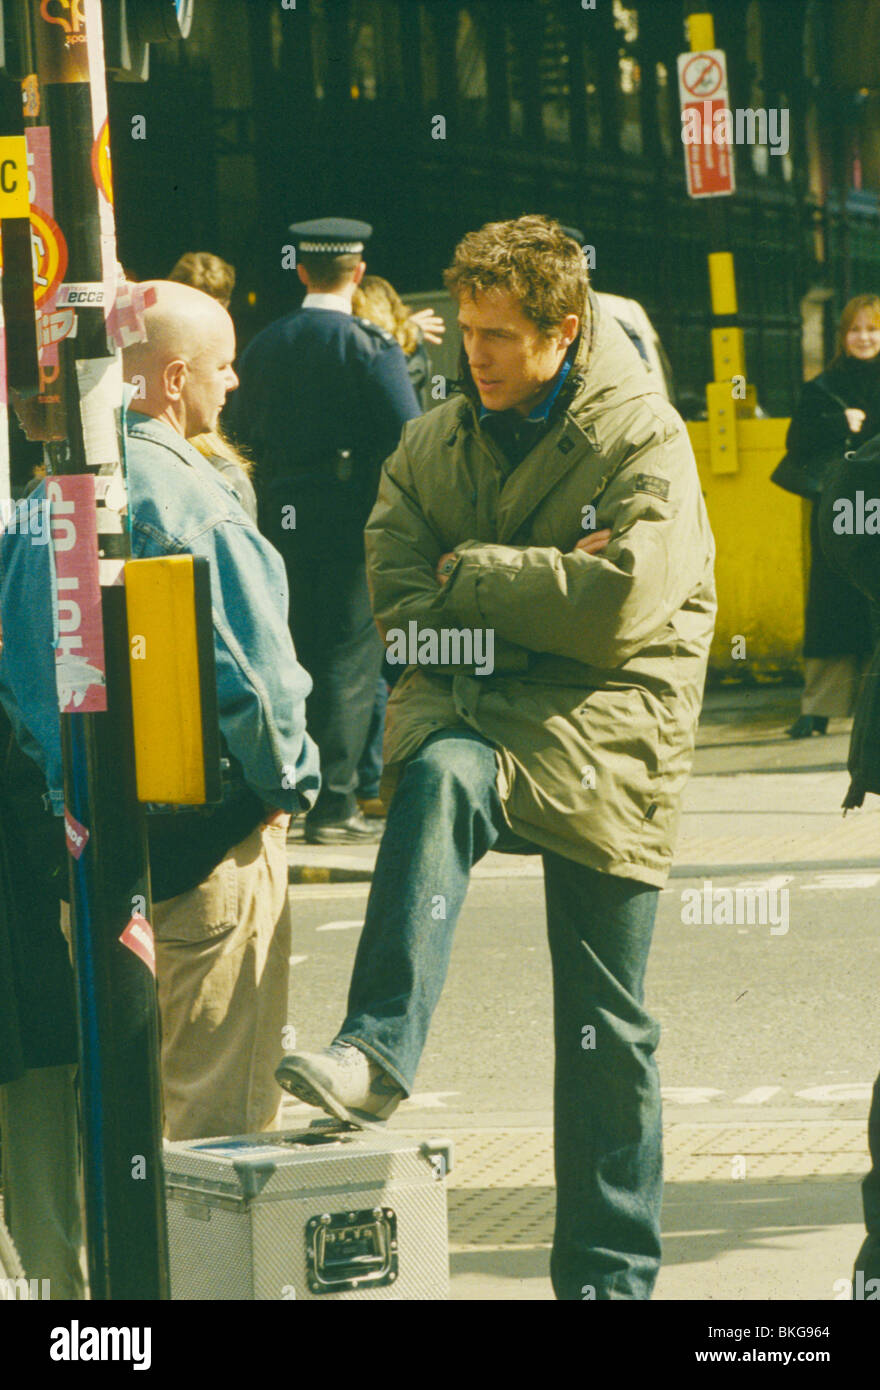 FILMING PRODUCTION (ALT) LOCATION (ALT) BEHIND THE SCENES (ALT) ON SET (ALT) O/S 'ABOUT A BOY' (2002) WITH HUGH GRANT FILM 522 Stock Photo